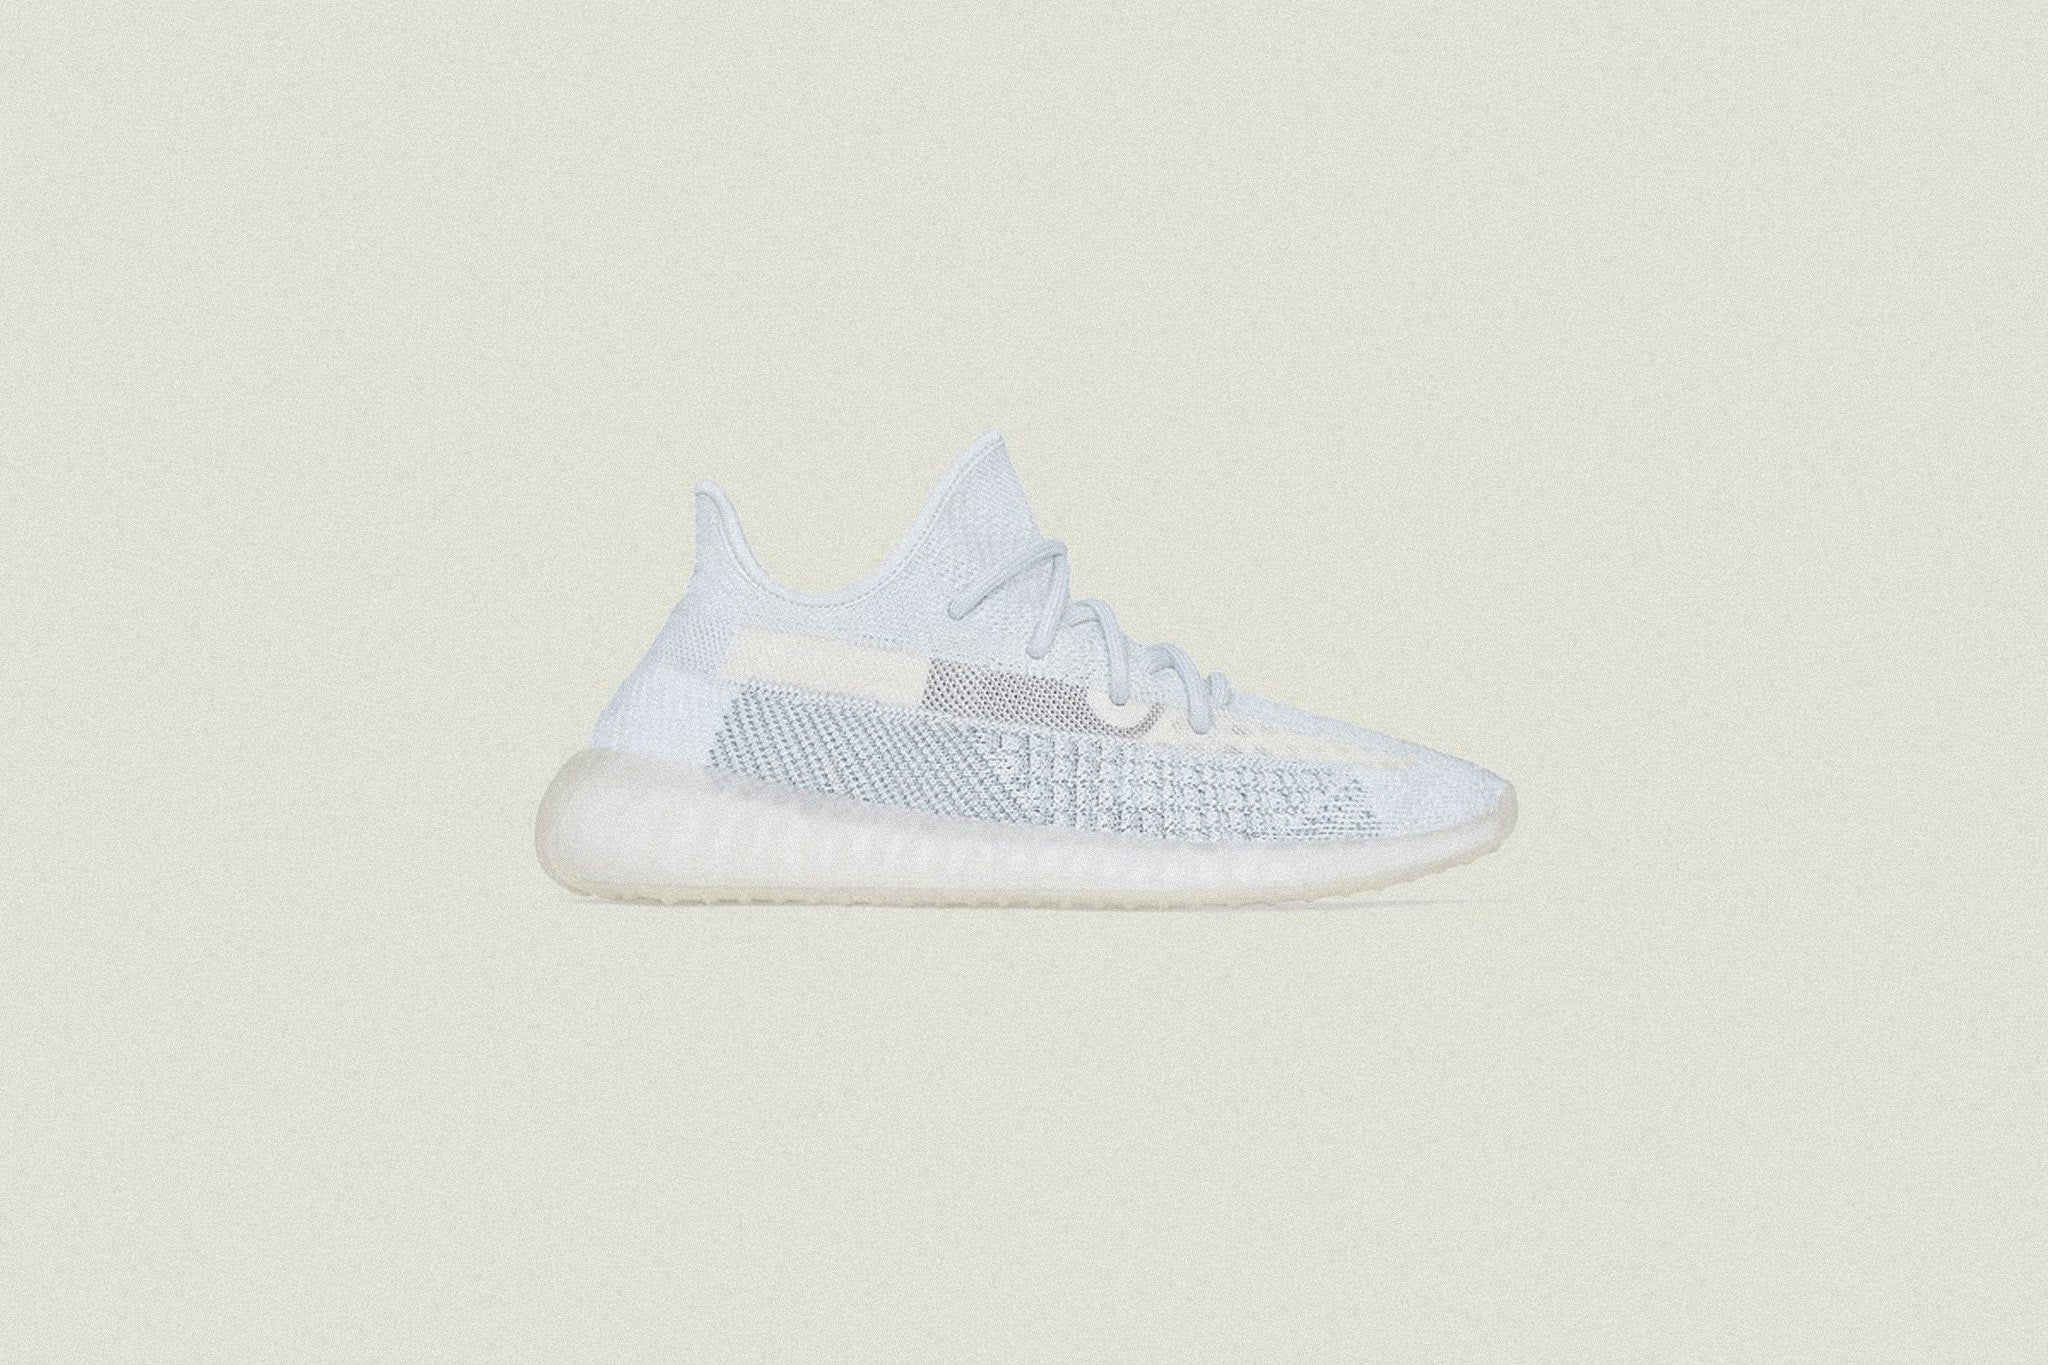 adidas Yeezy Boost 350 v2 “Cloud White 